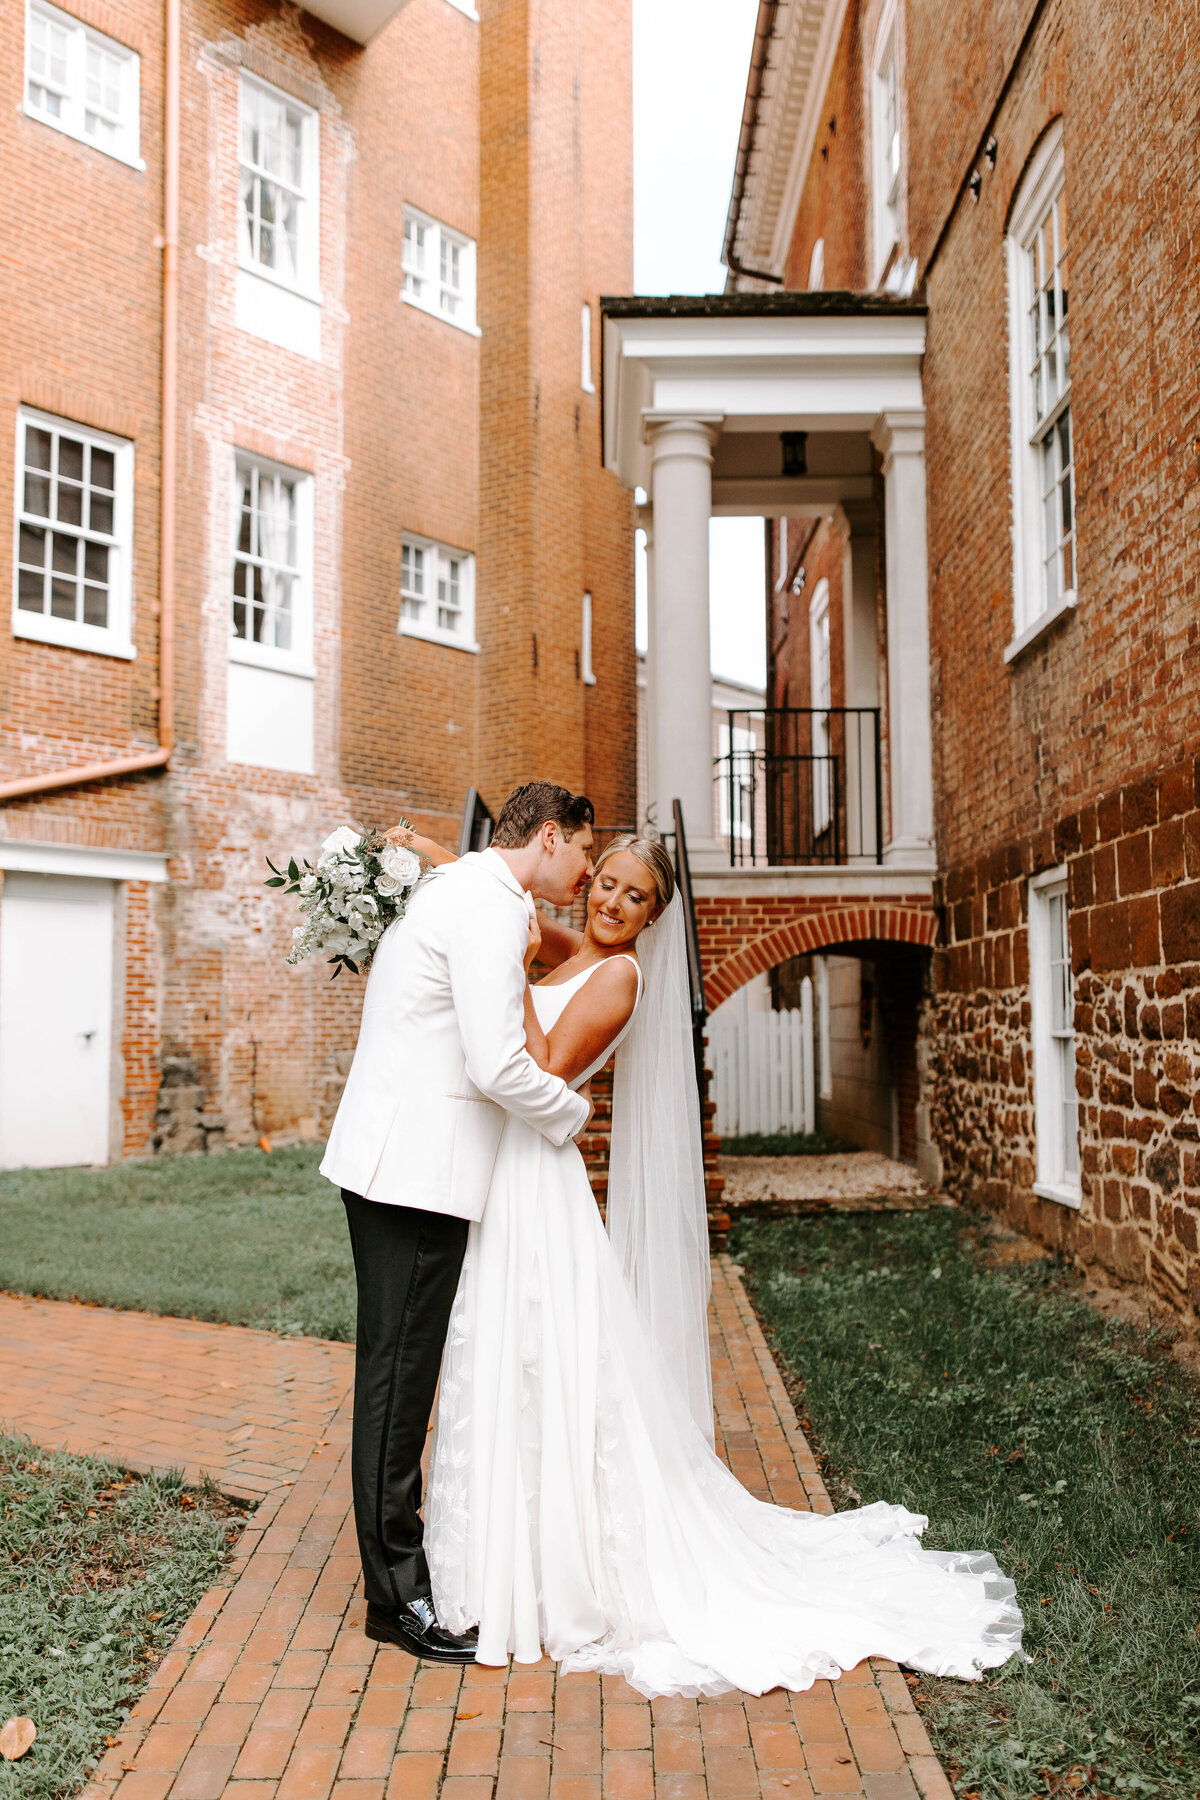 Bride and groom on their wedding day. The couple is standing stomach to stomach and  the groom has his nose on the side of the brides face as she smiles down towards her shoulder. The couple stands in front of a beautiful brick building.